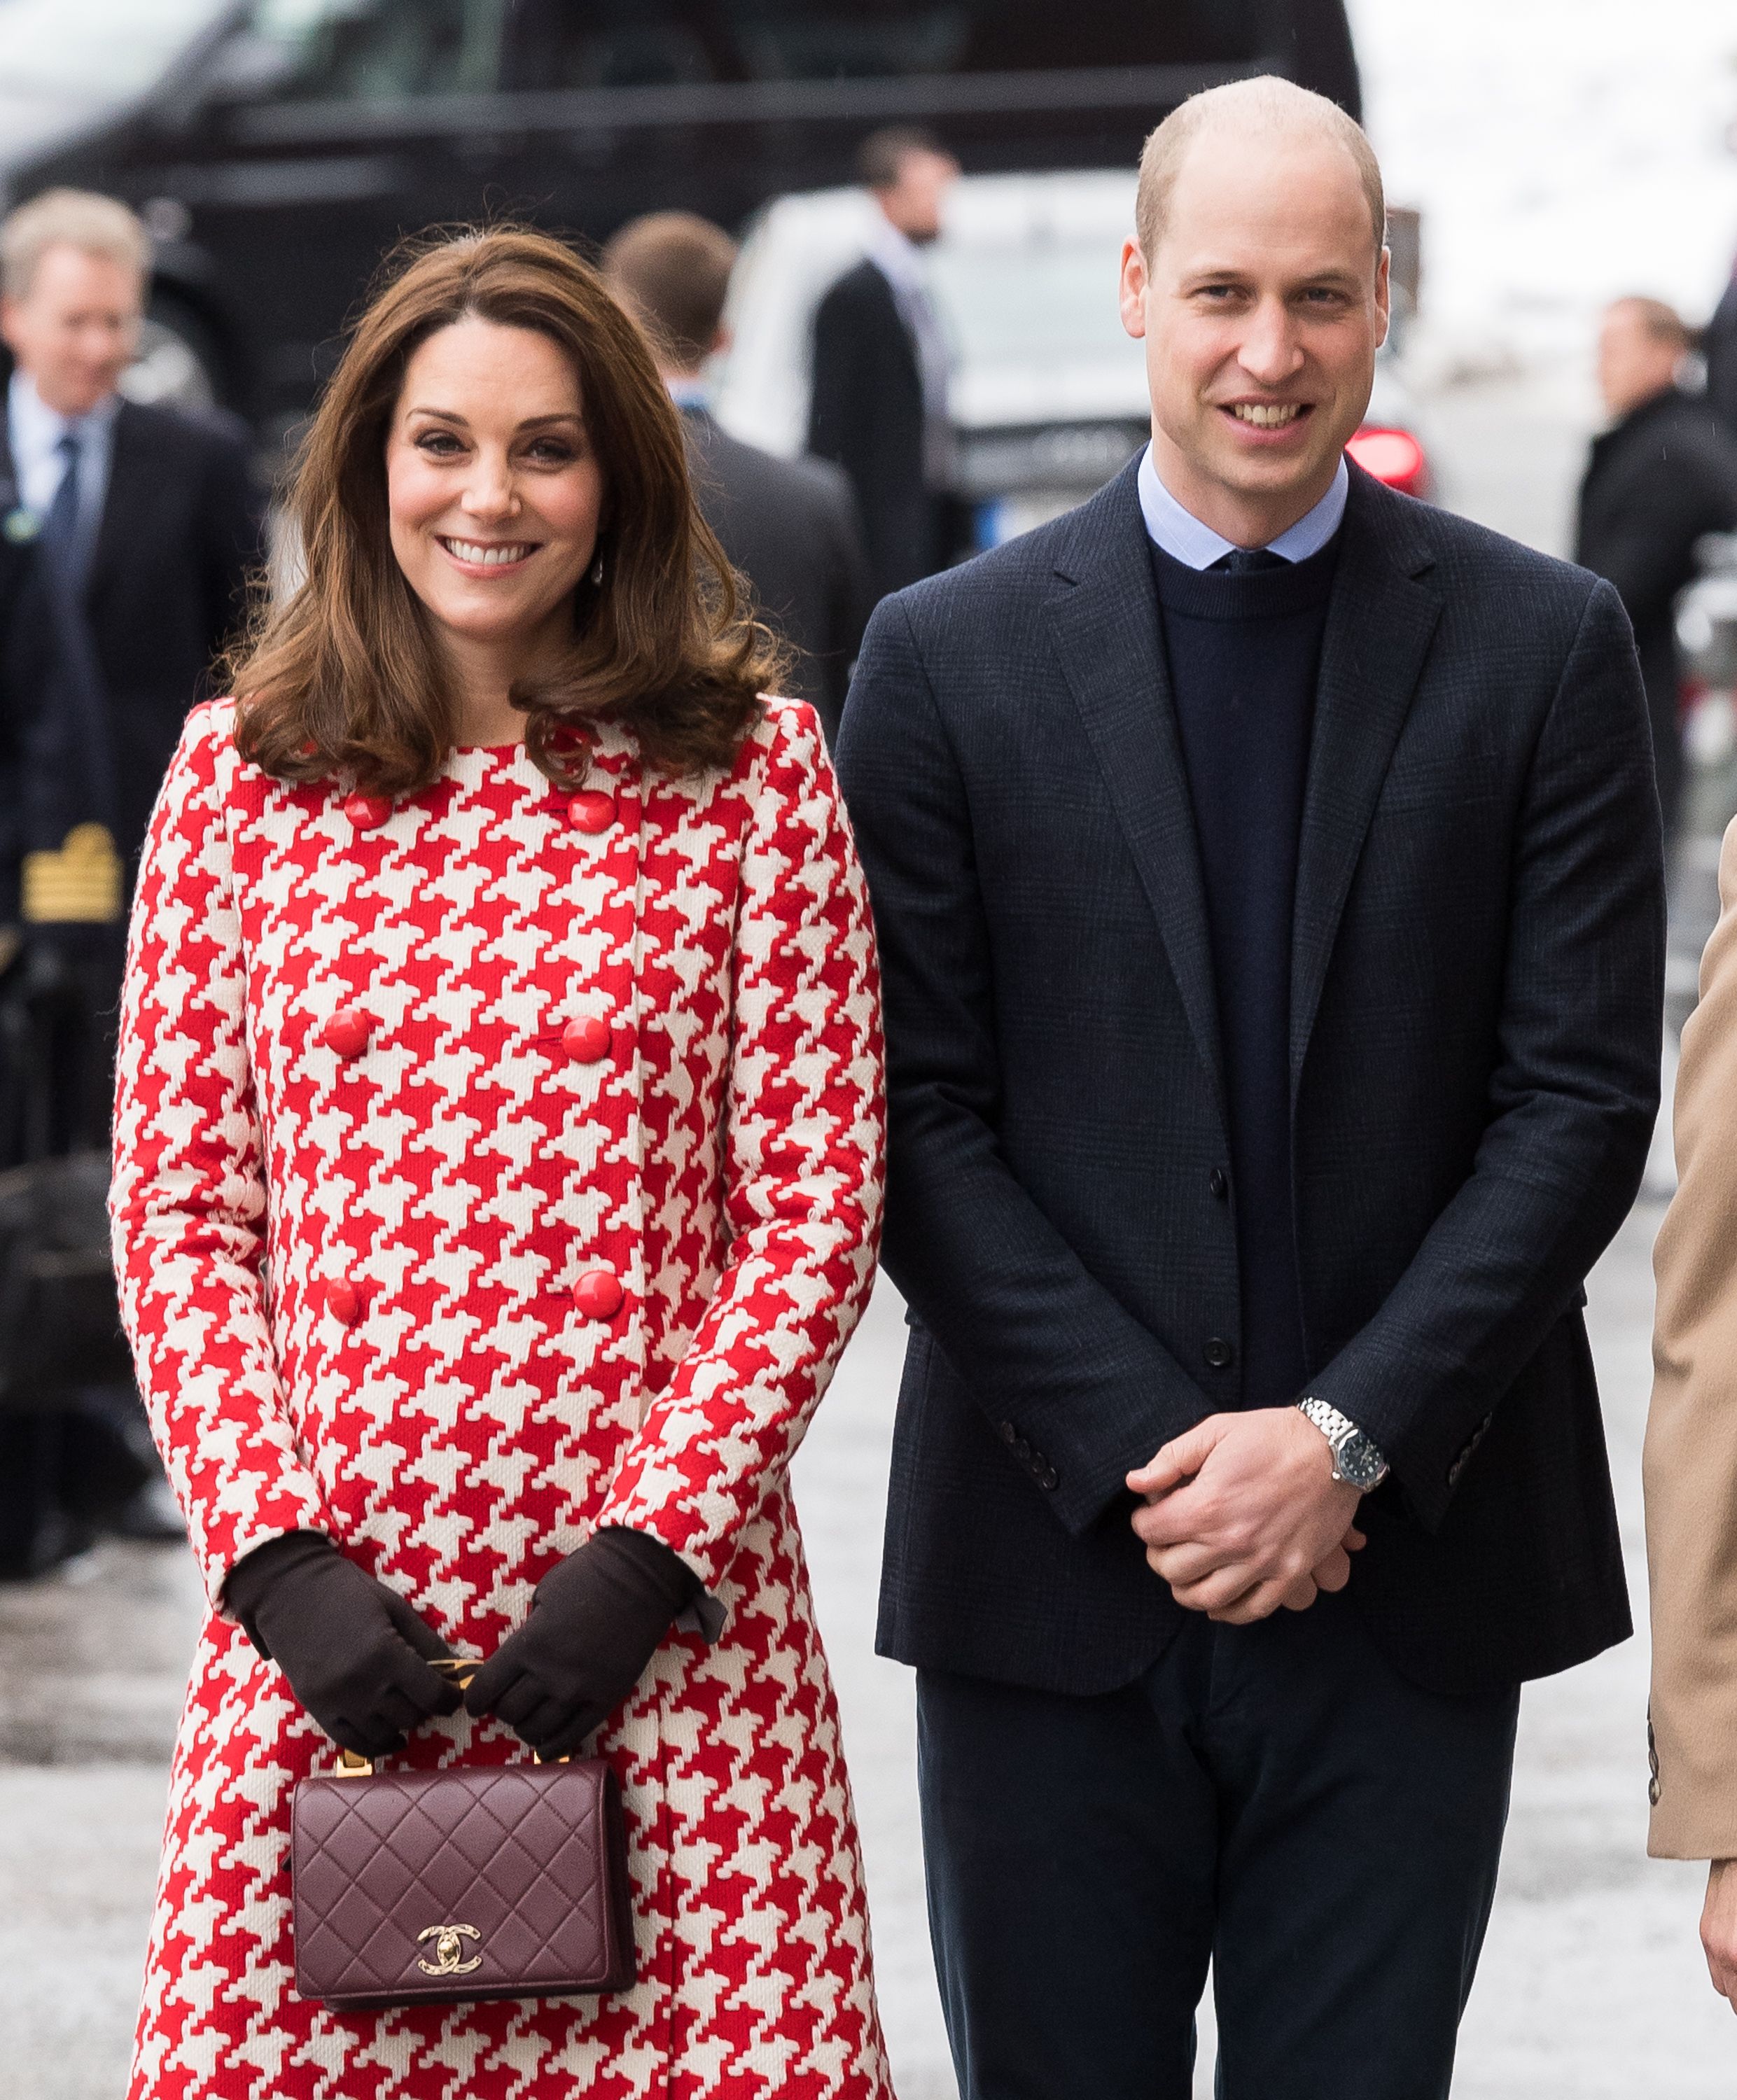 Kate Middleton and Prince William visit the Karolinska Institute to meet with academics and practitioners during day two of their Royal visit to Sweden and Norway on January 31, 2018 in Stockholm, Sweden | Photo: Getty Images